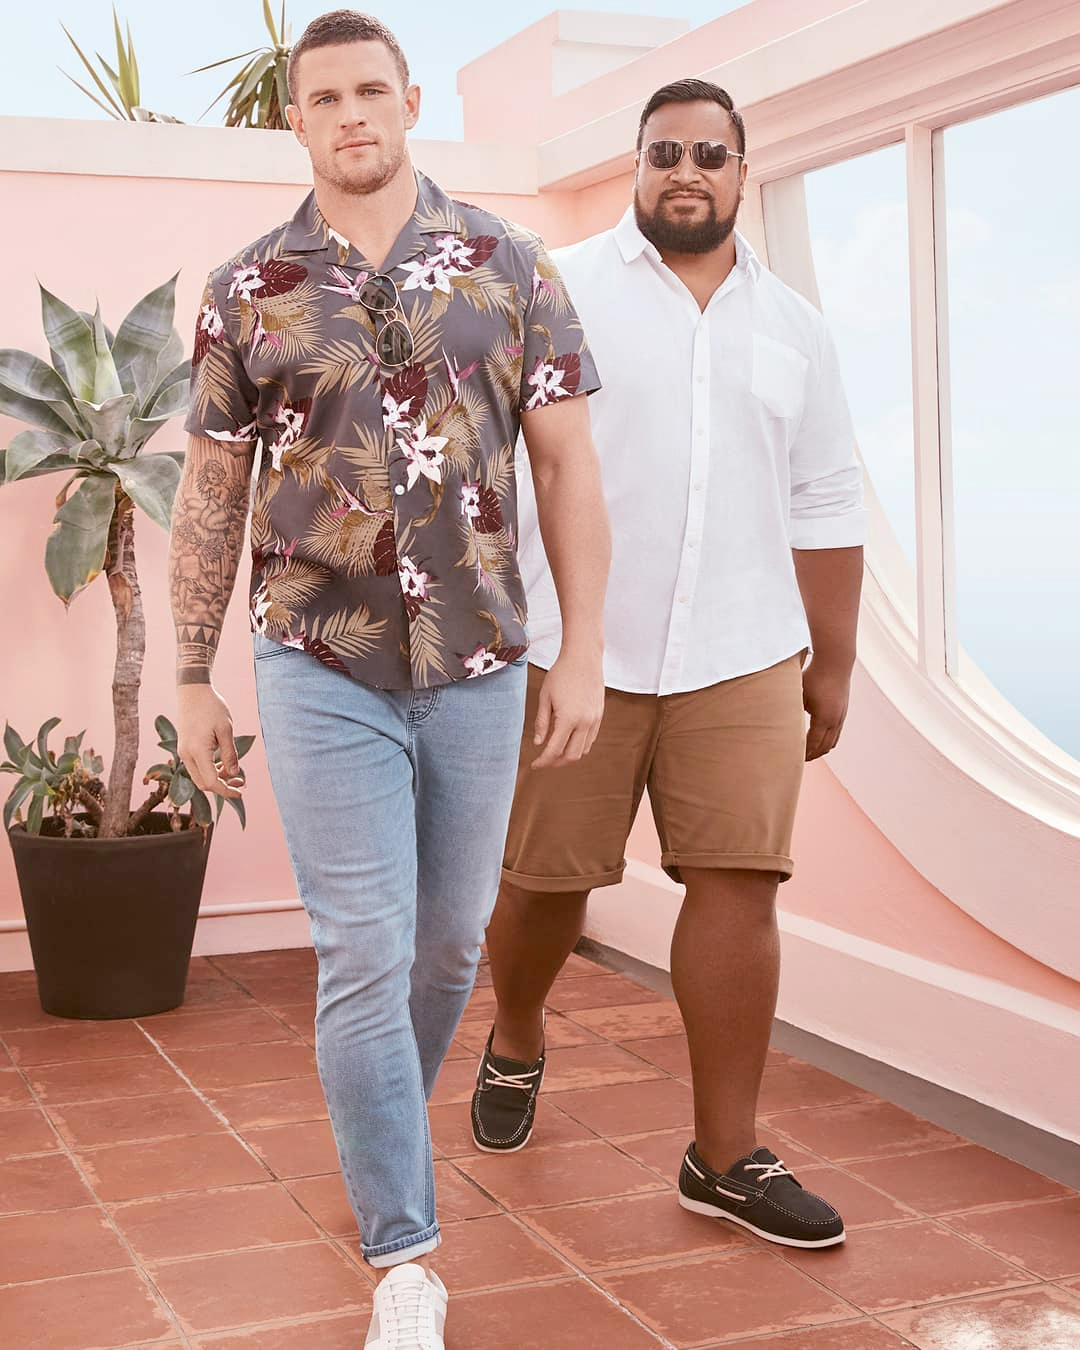 Marquee flydende mikrocomputer Where to buy plus size menswear - This is Meagan Kerr